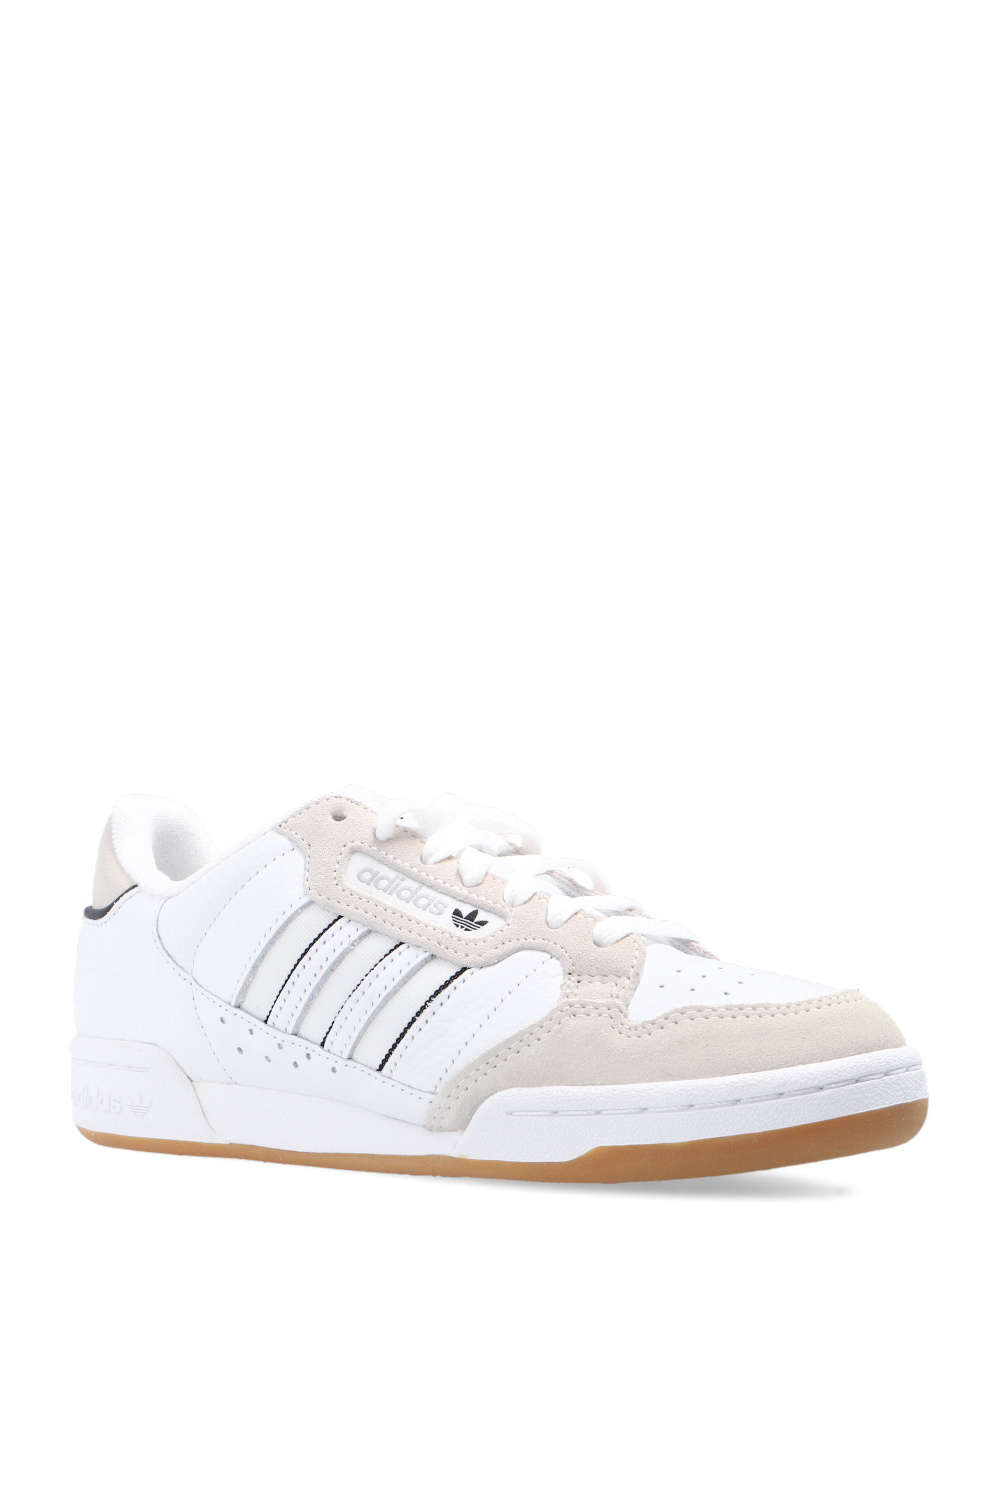 champion x adidas nmd white Shoes | boost \'Continental Women\'s | Stripes\' Originals sneakers | xr_1 IetpShops 80 ADIDAS